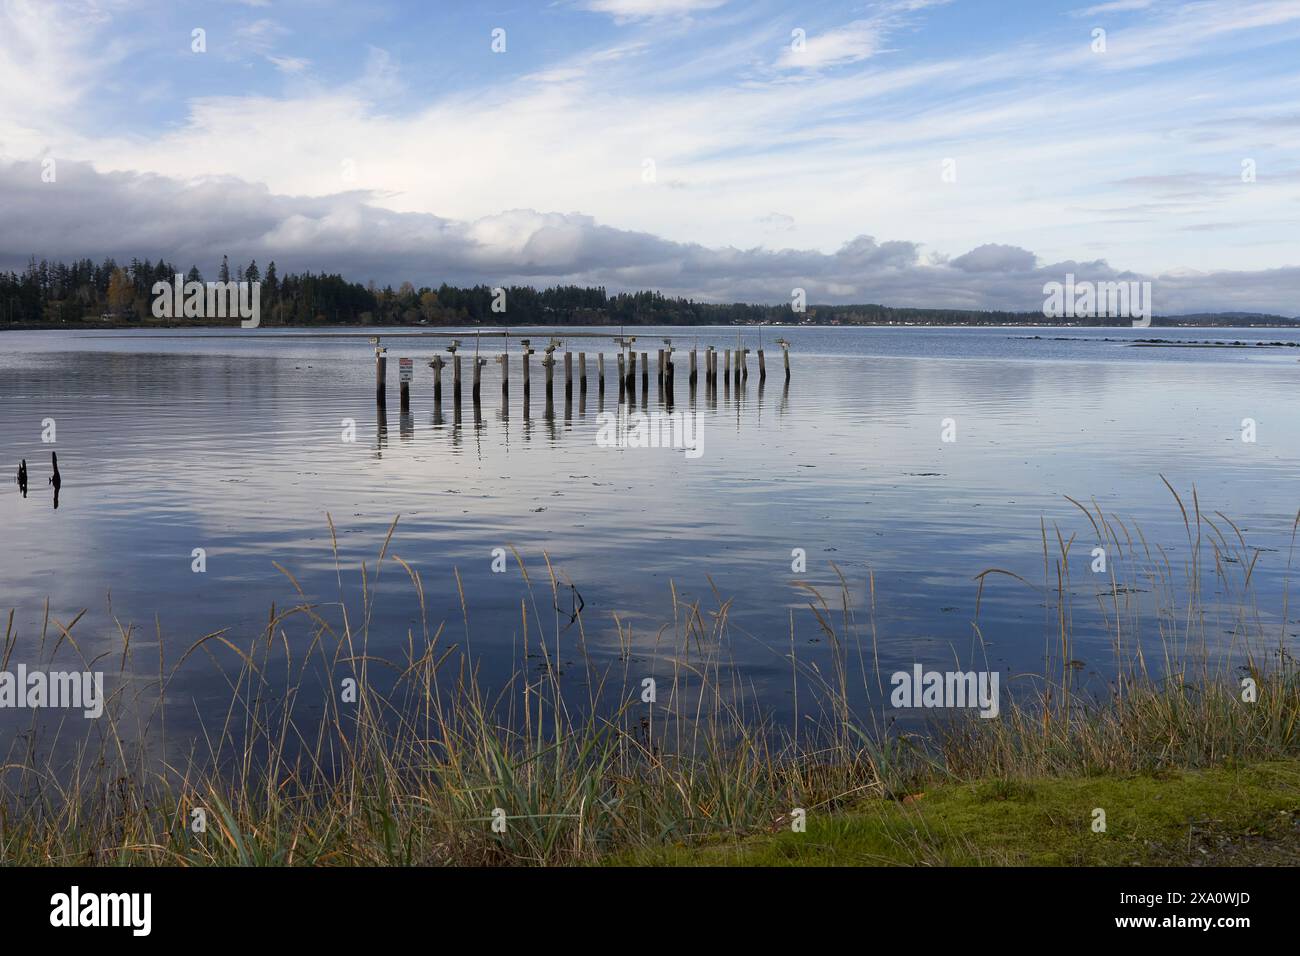 A serene evening at the ocean with clouds reflected in the calm waters and historic pilings in the water and a grassy shoreline. Stock Photo